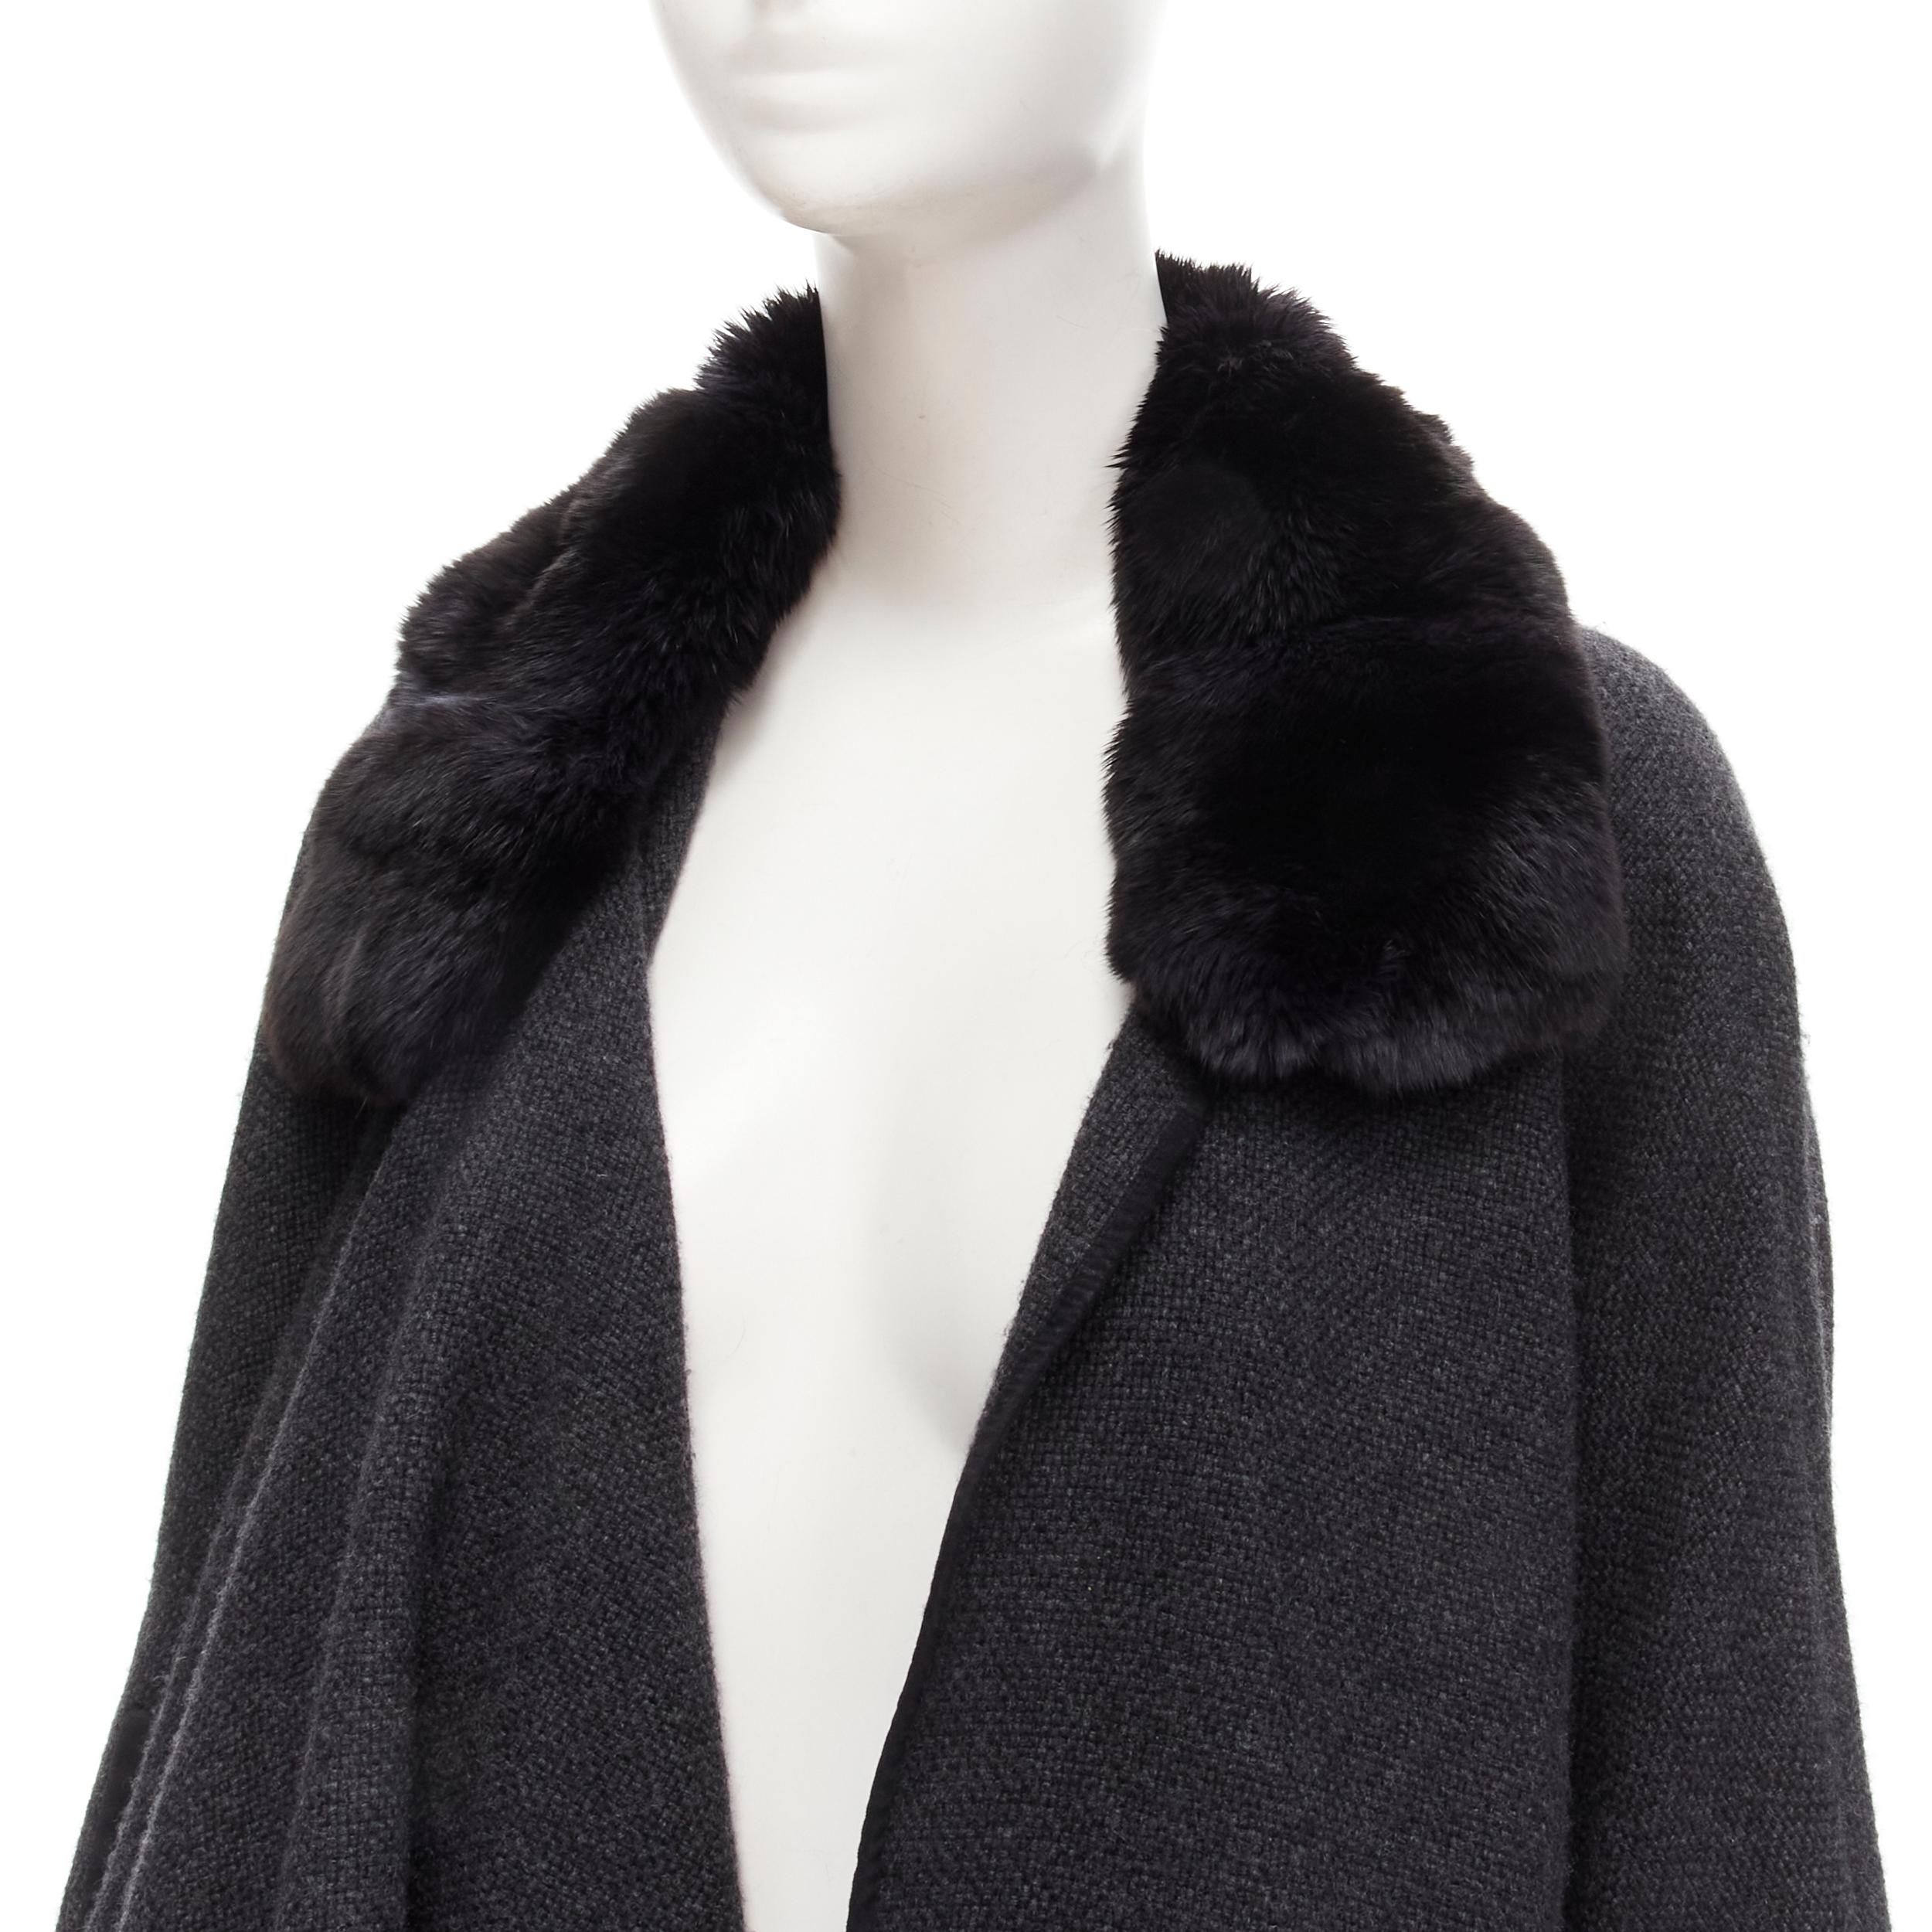 LORO PIANA 100% cashmere dark grey fur collar draped scarf poncho coat S
Reference: TGAS/C01860
Brand: Loro Piana
Material: Cashmere, Fur, Leather
Color: Grey
Pattern: Solid
Extra Details: No closure. Fabric trimmed inside seams.
Made in: